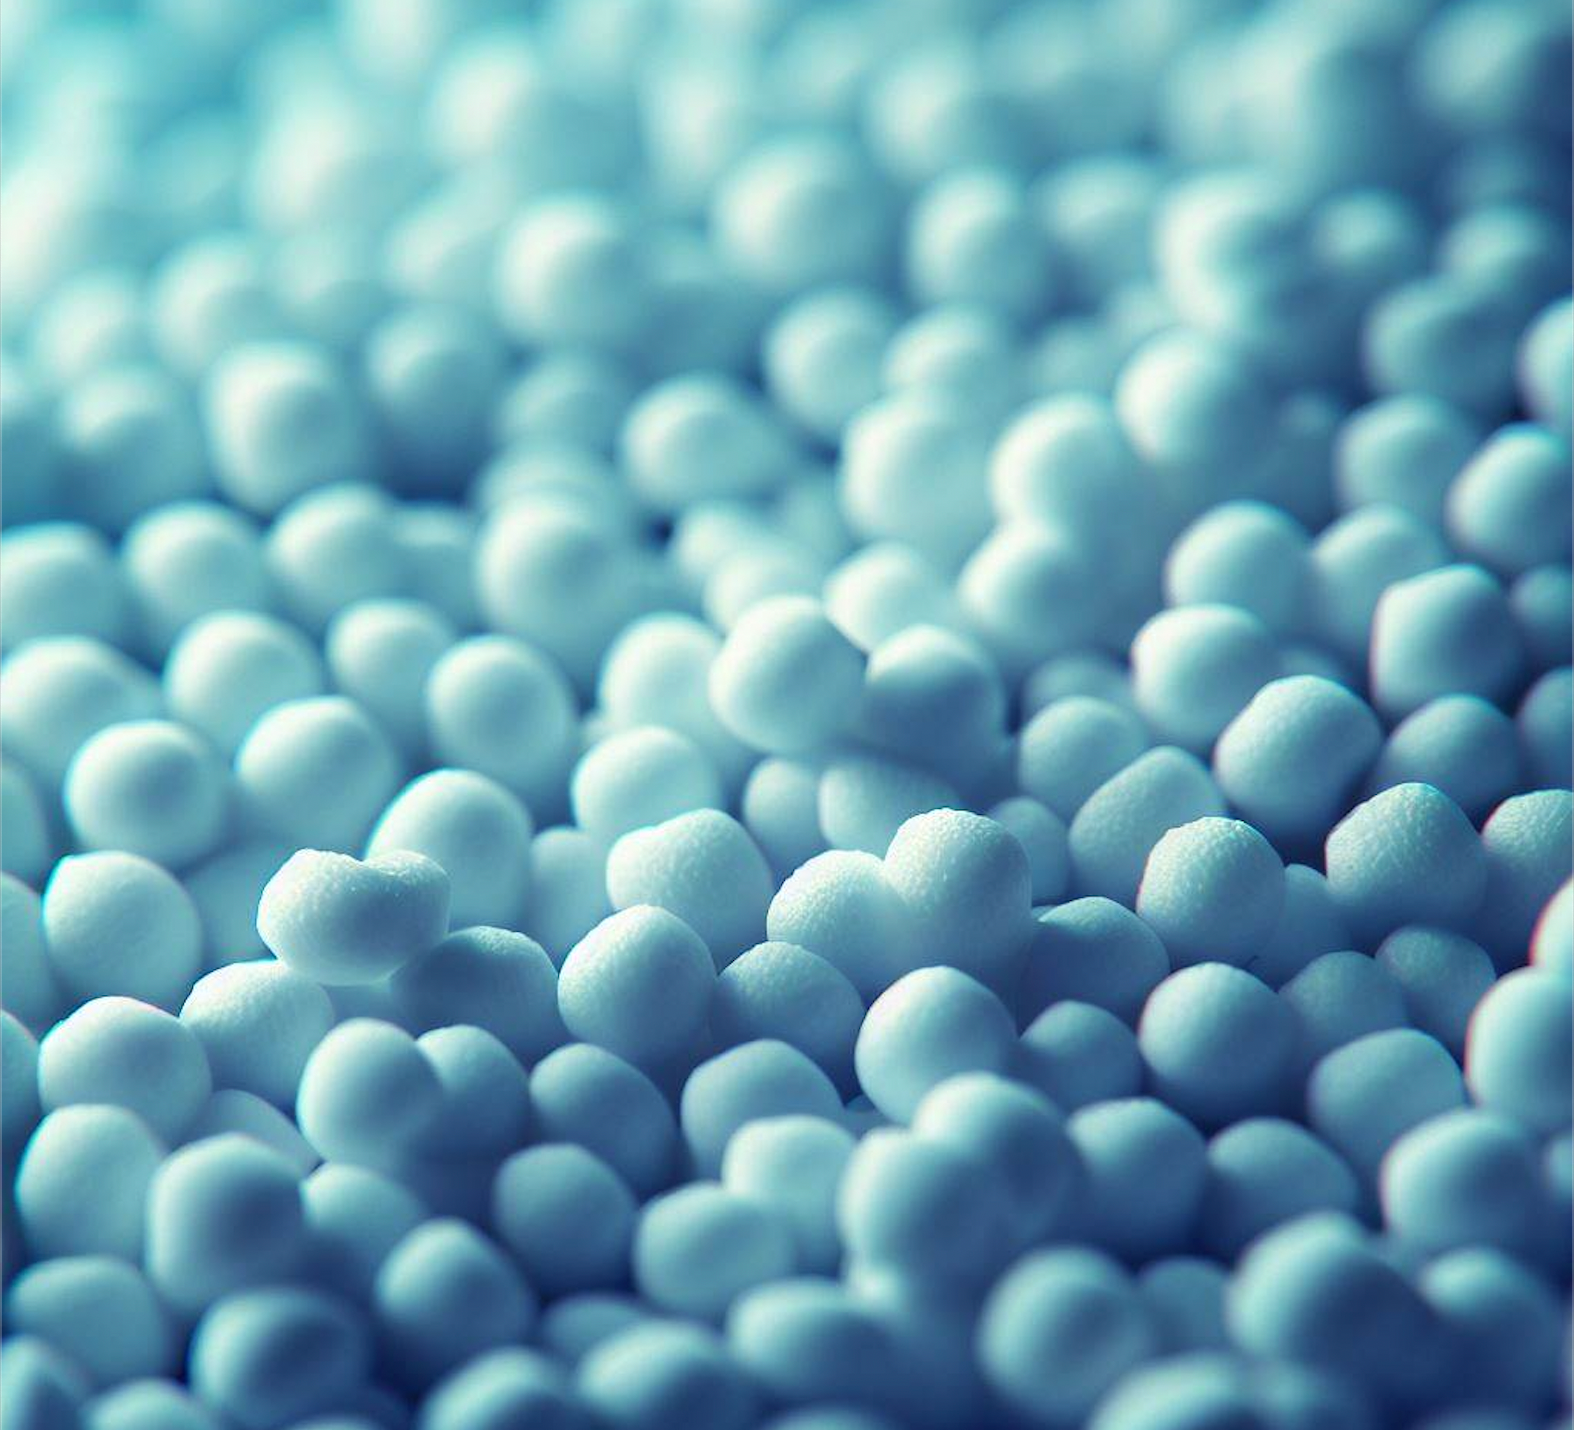 Are Expanded Polystyrene (EPS) Beads Toxic?